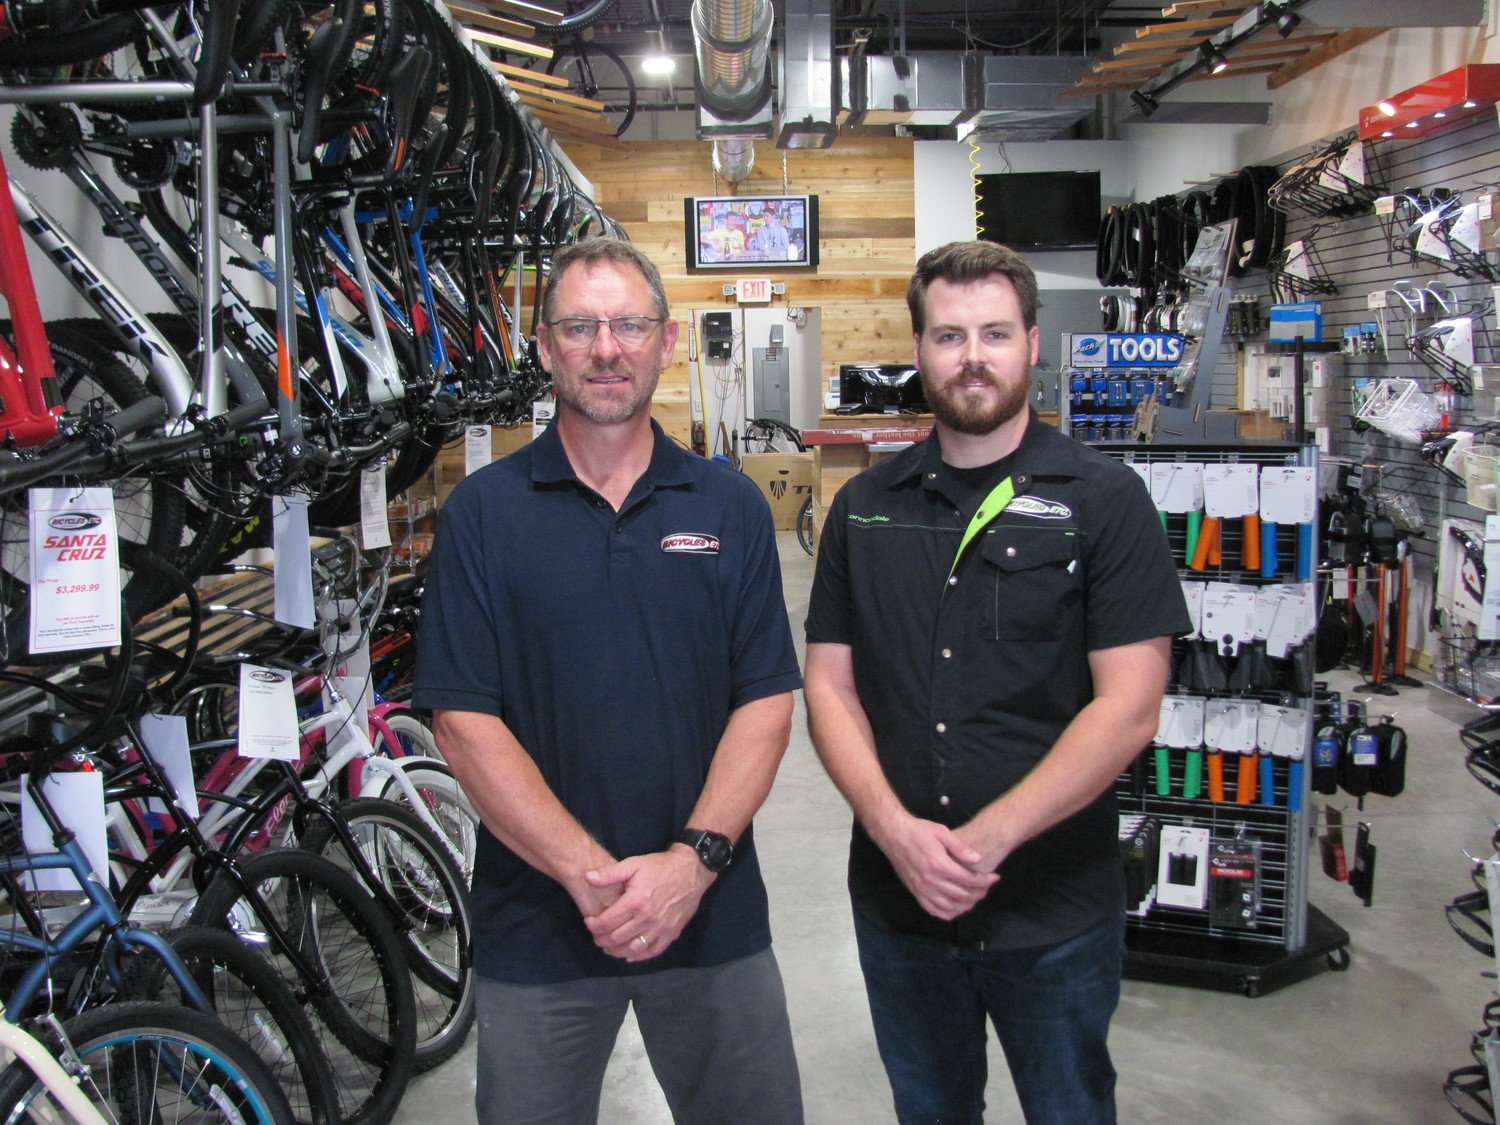 Owner Michael Scarbrough and sales associate Riley Peters pose for a photo in their newly opened Bicycles Etc. at Nocatee Town Center. The store “soft opened” about three weeks ago and held its grand opening event last weekend. The business is located on Capital Green Drive, just southeast of Publix, and offers bicycles (ranging from kids’ bikes to fast road racers), parts and accessories, as well as repair services and rentals. For more information on the business, visit http://bicyclesetc.net/.